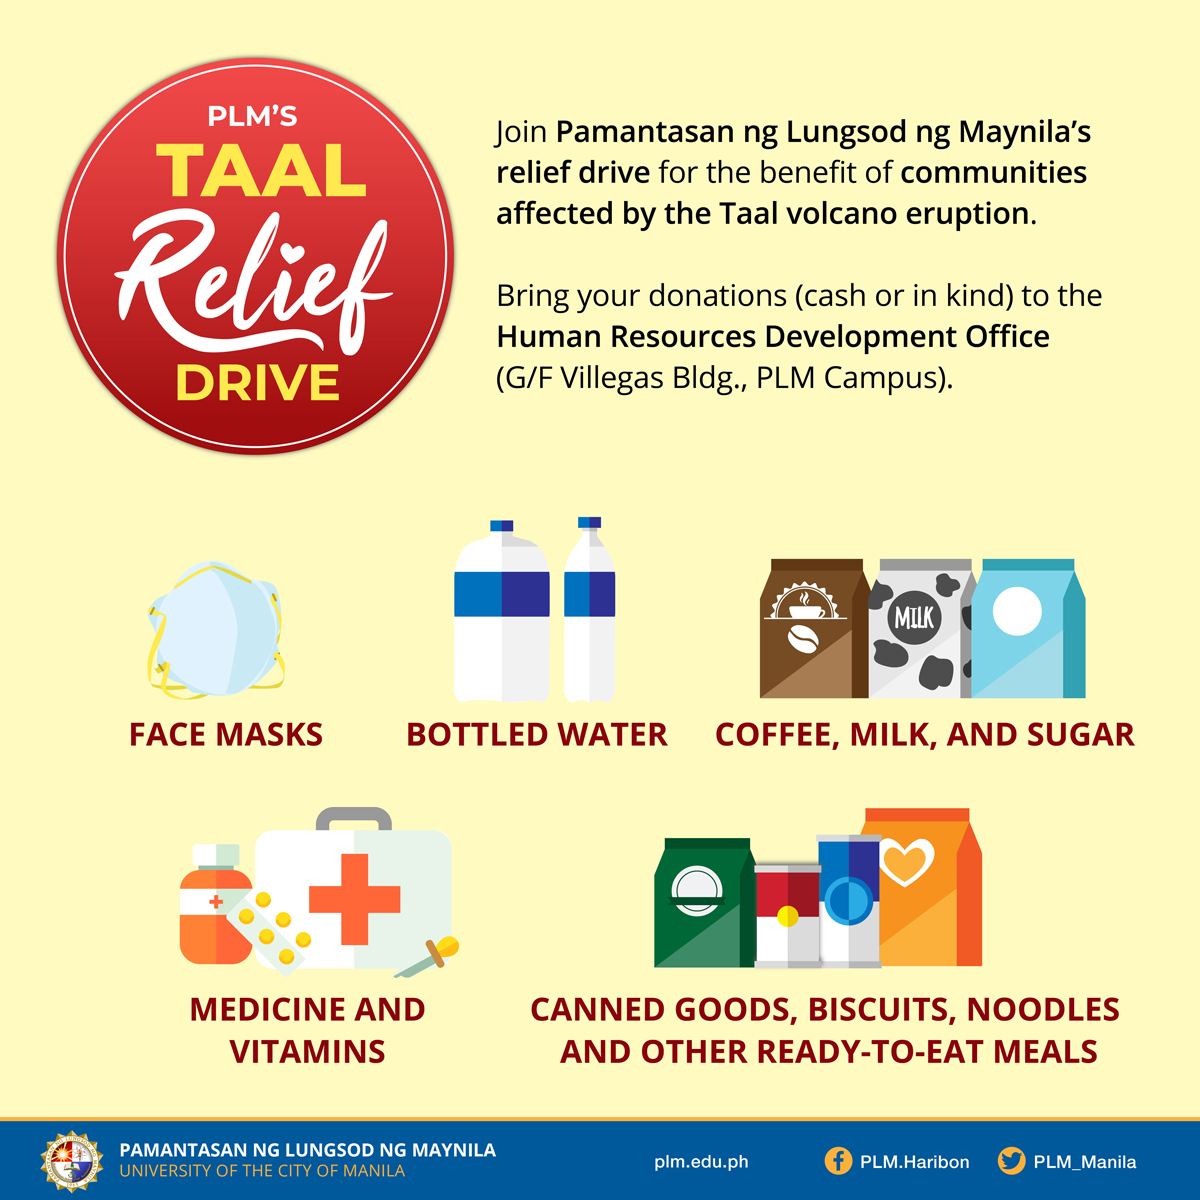 PLM's Taal relief drive